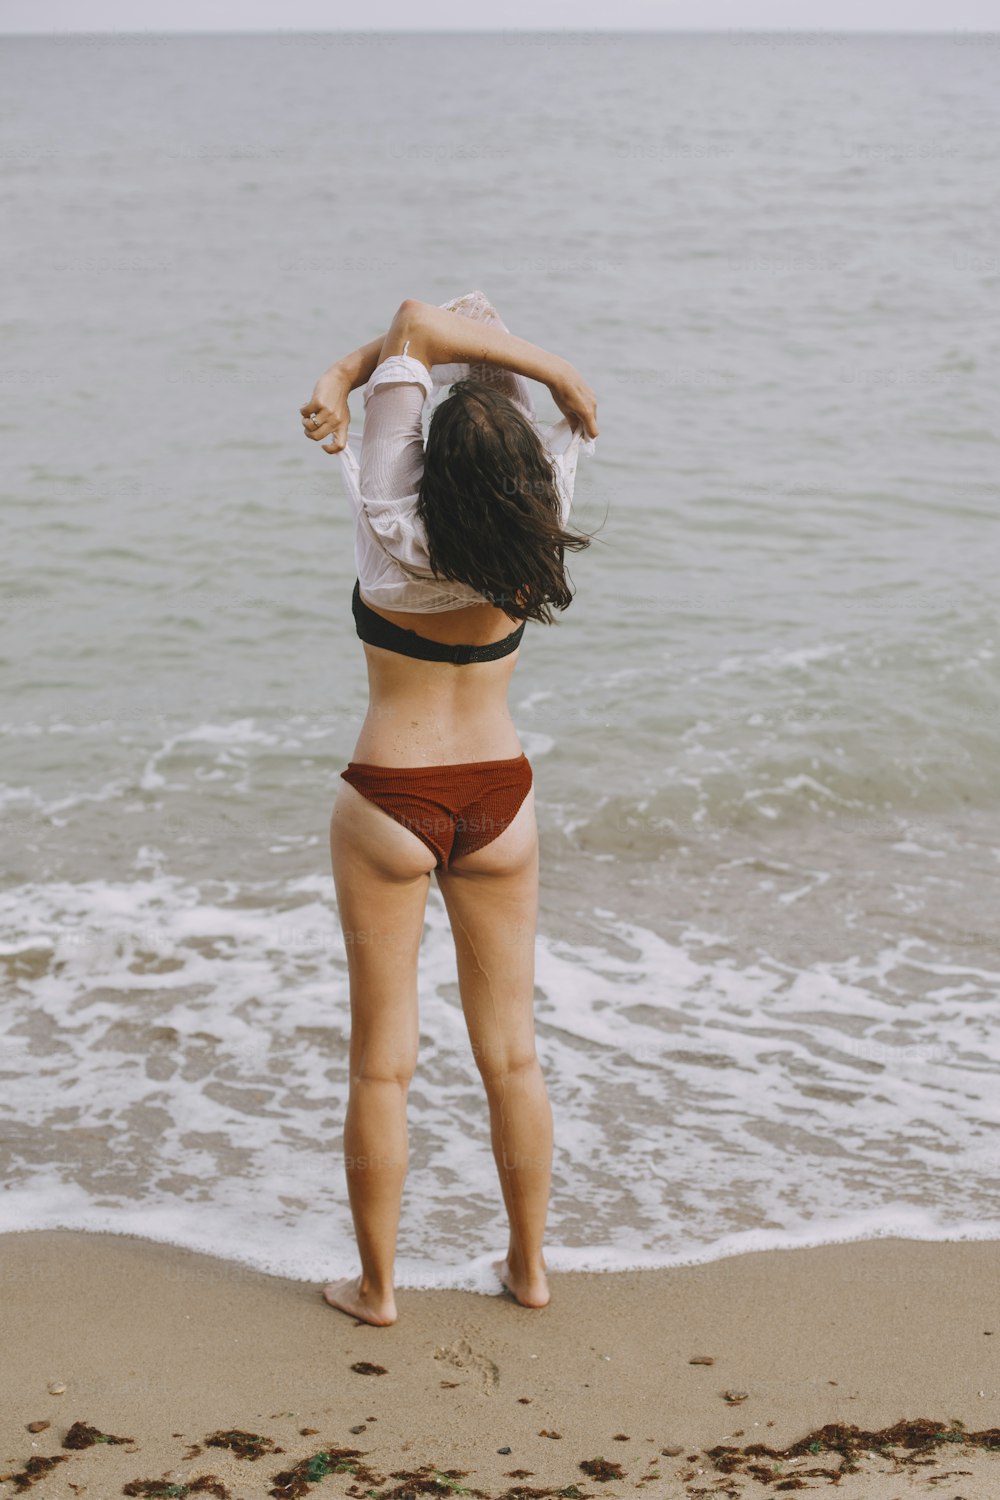 Best 500+ Booty Pictures  Download Free Images & Stock Photos on Unsplash